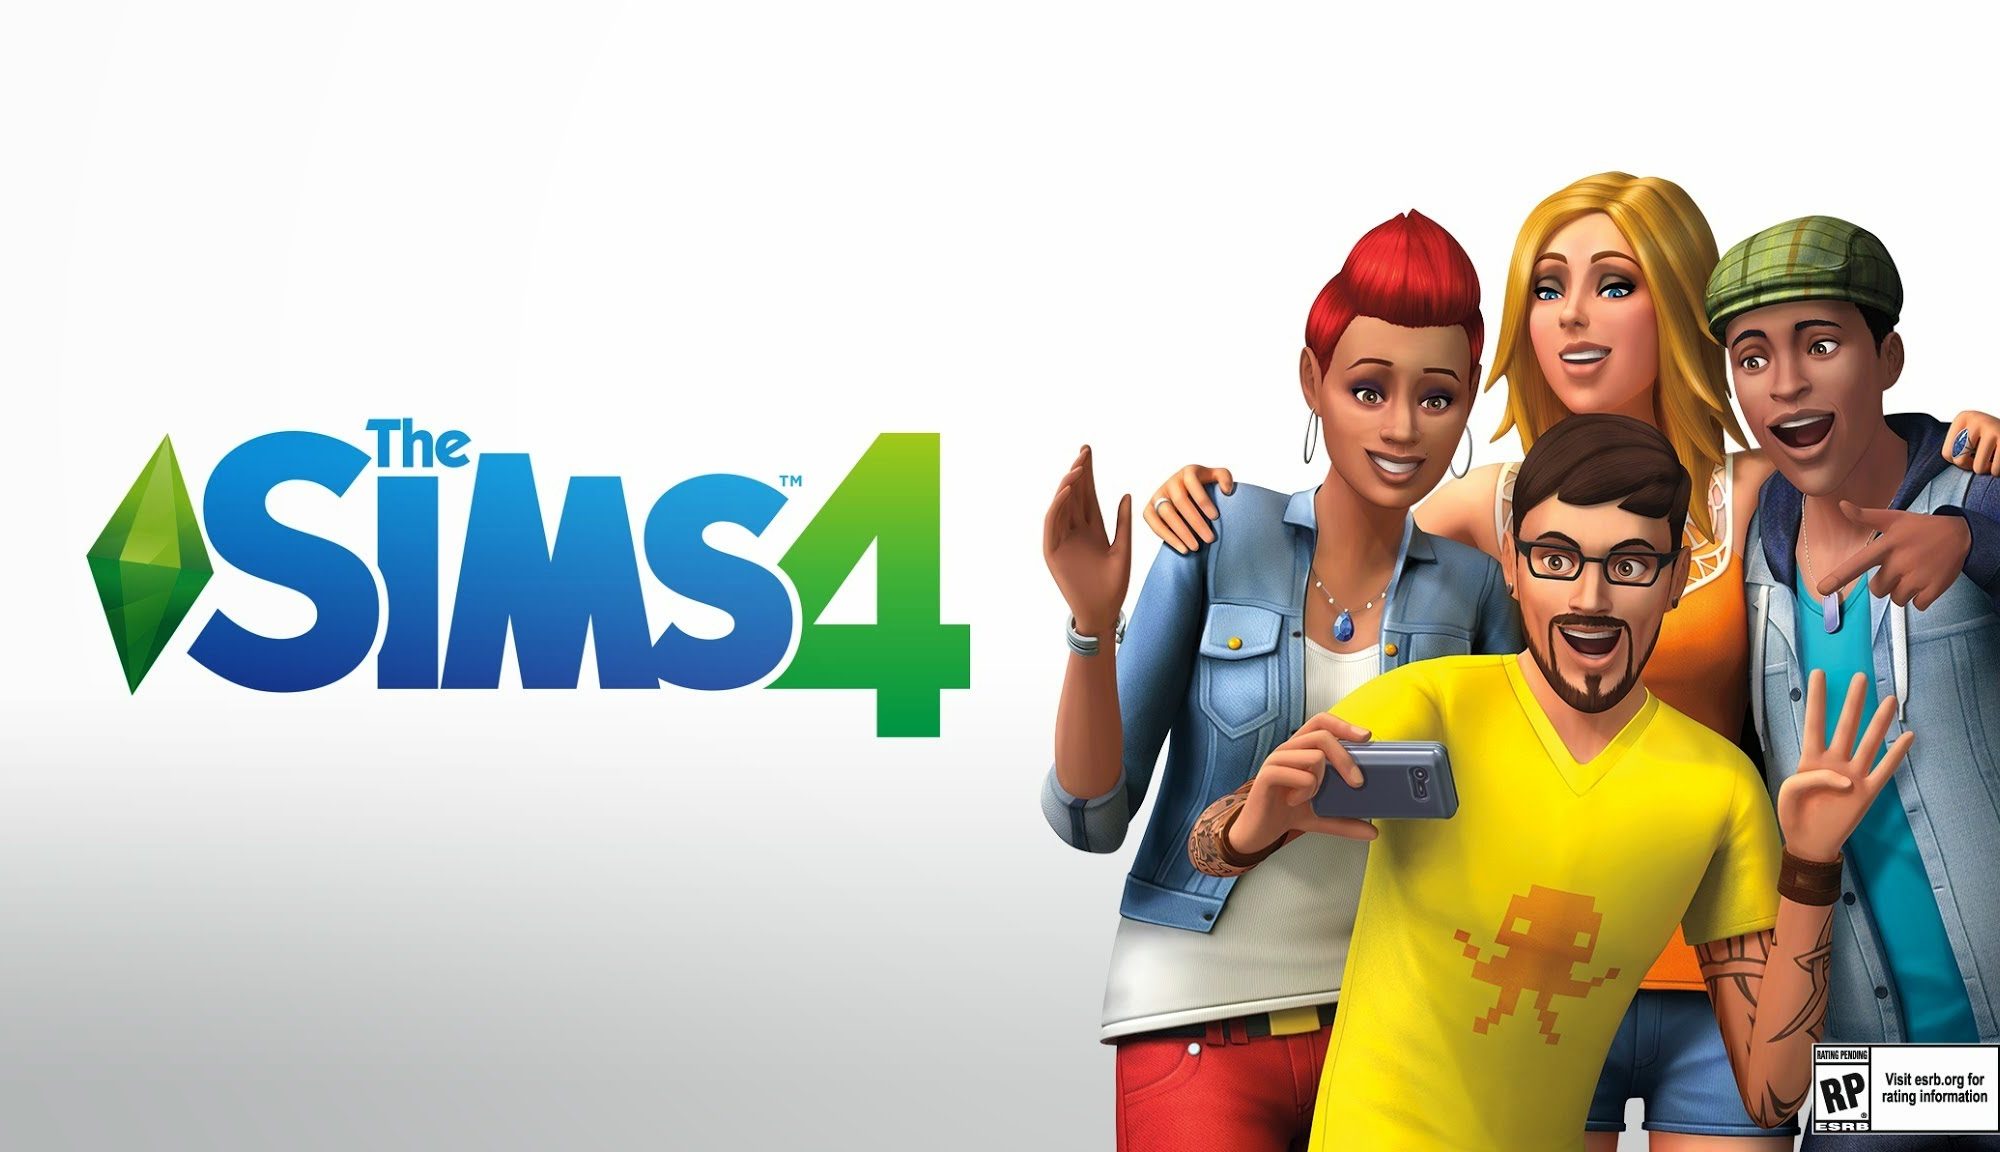 sims 4 all expansions 2018